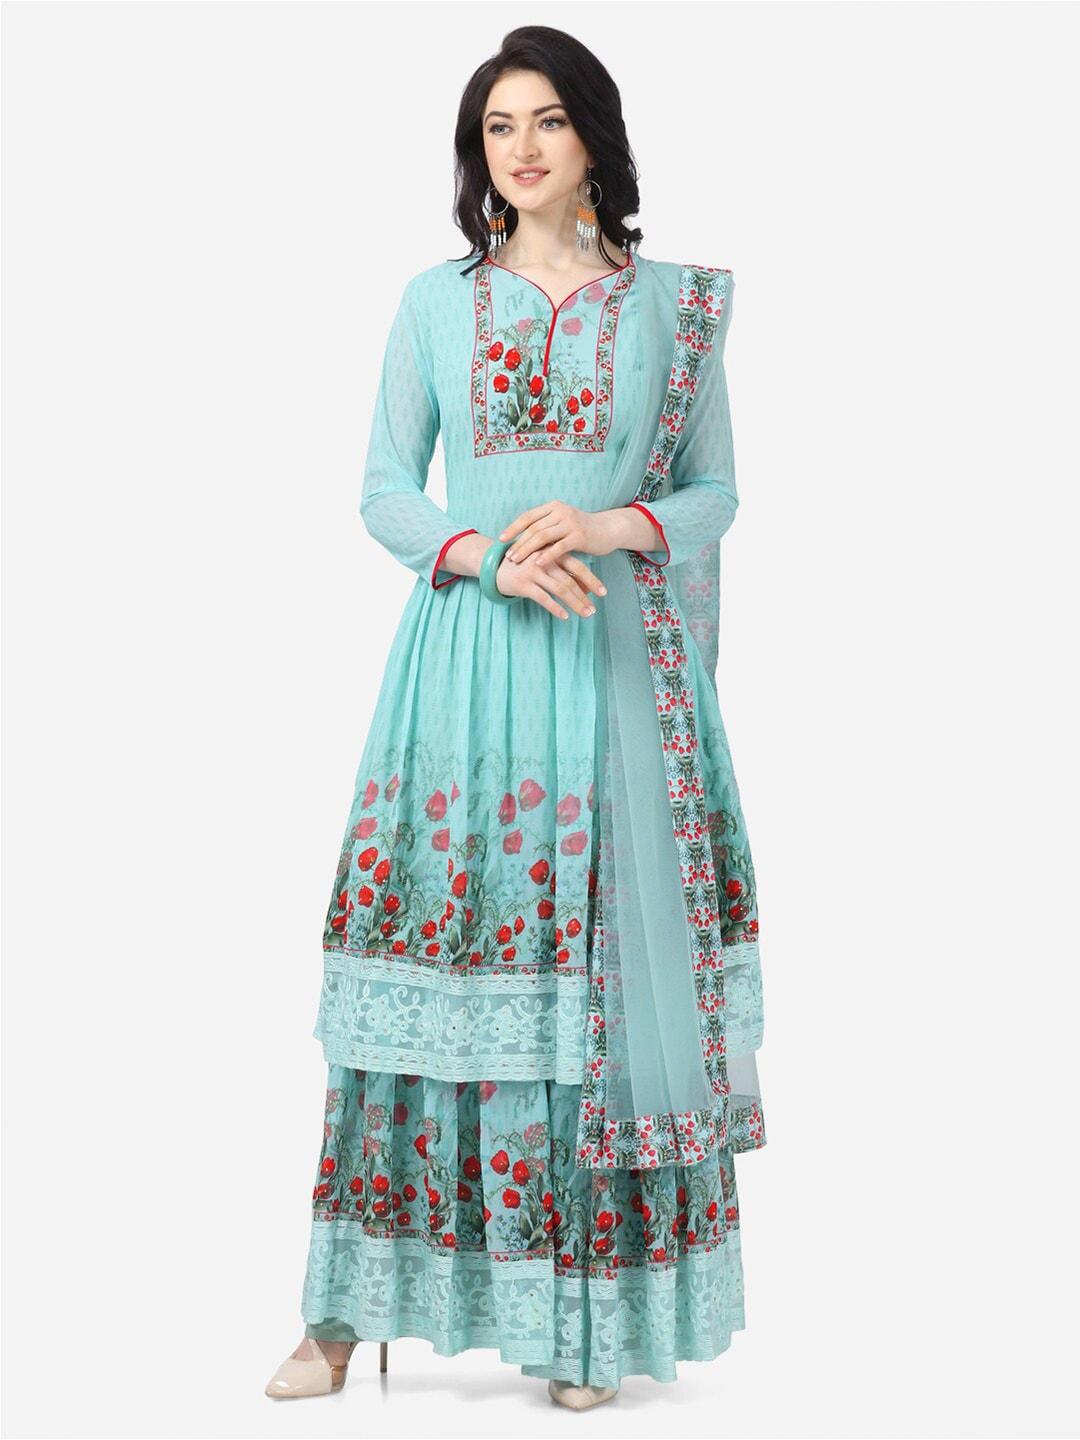 mf Floral Printed Georgette Semi-Stitched Dress Material